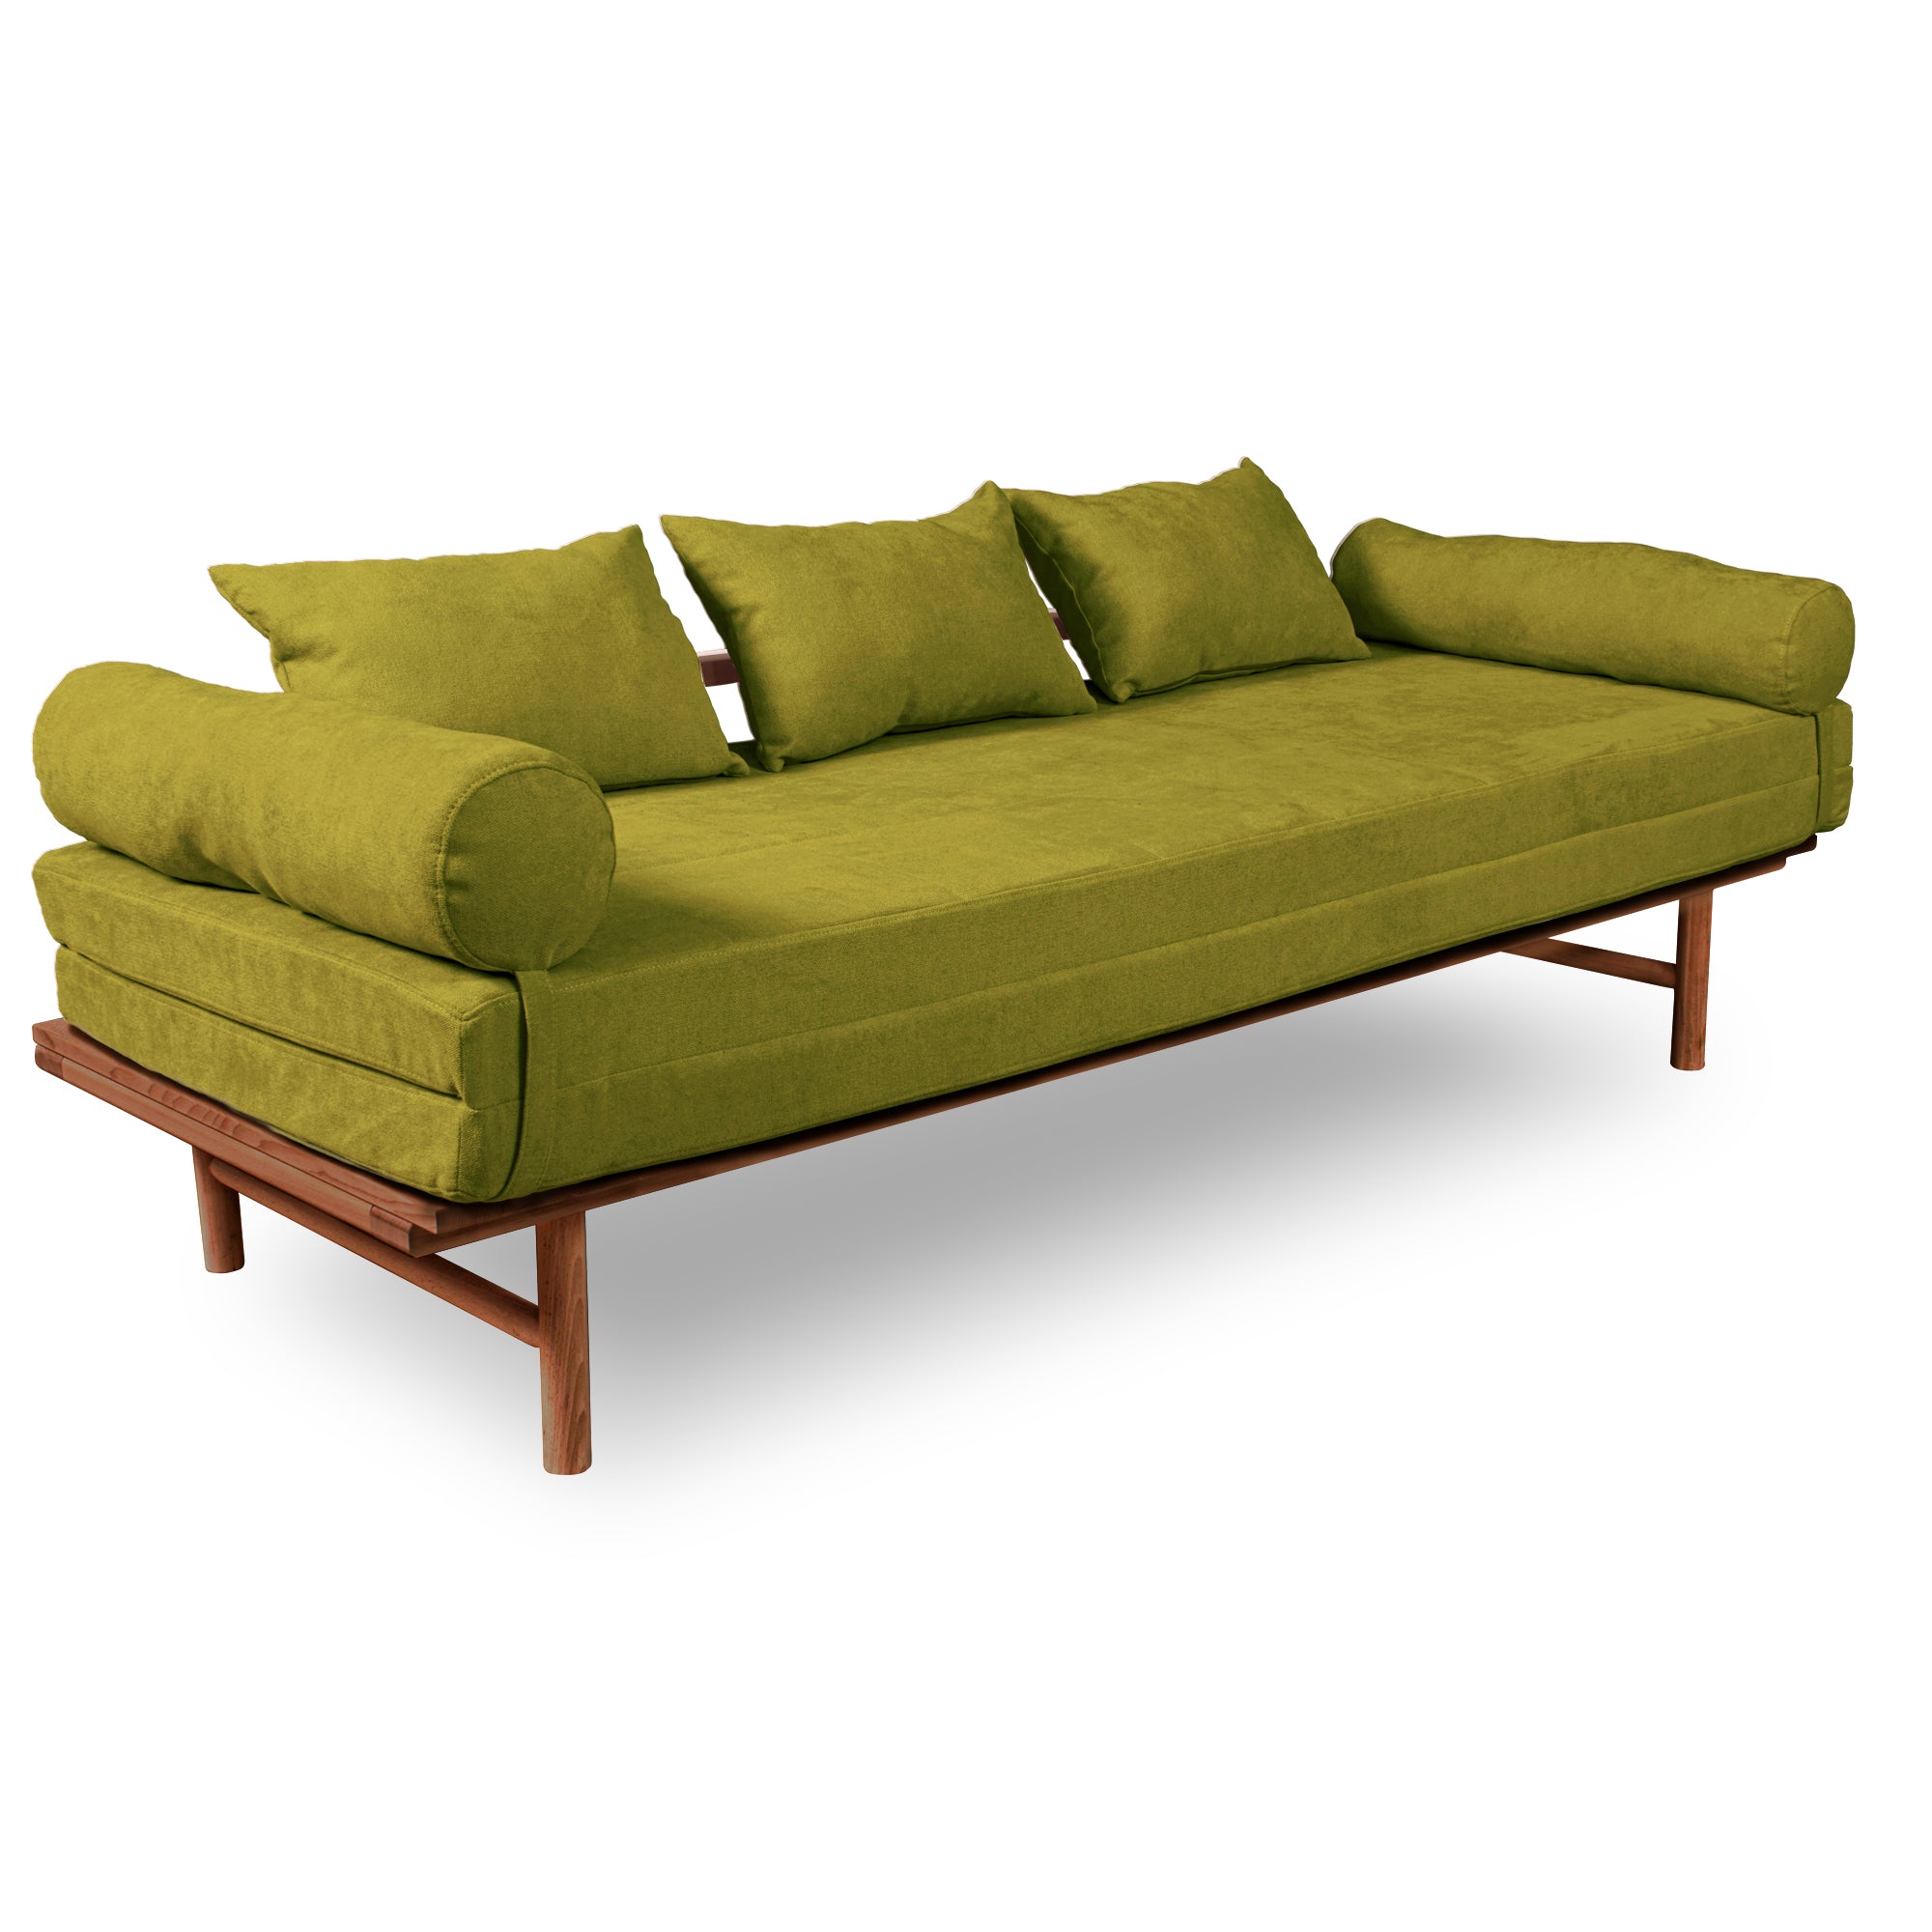 Le MAR Folding Daybed, Beech Wood Frame, Caramel Colour-green upholstery